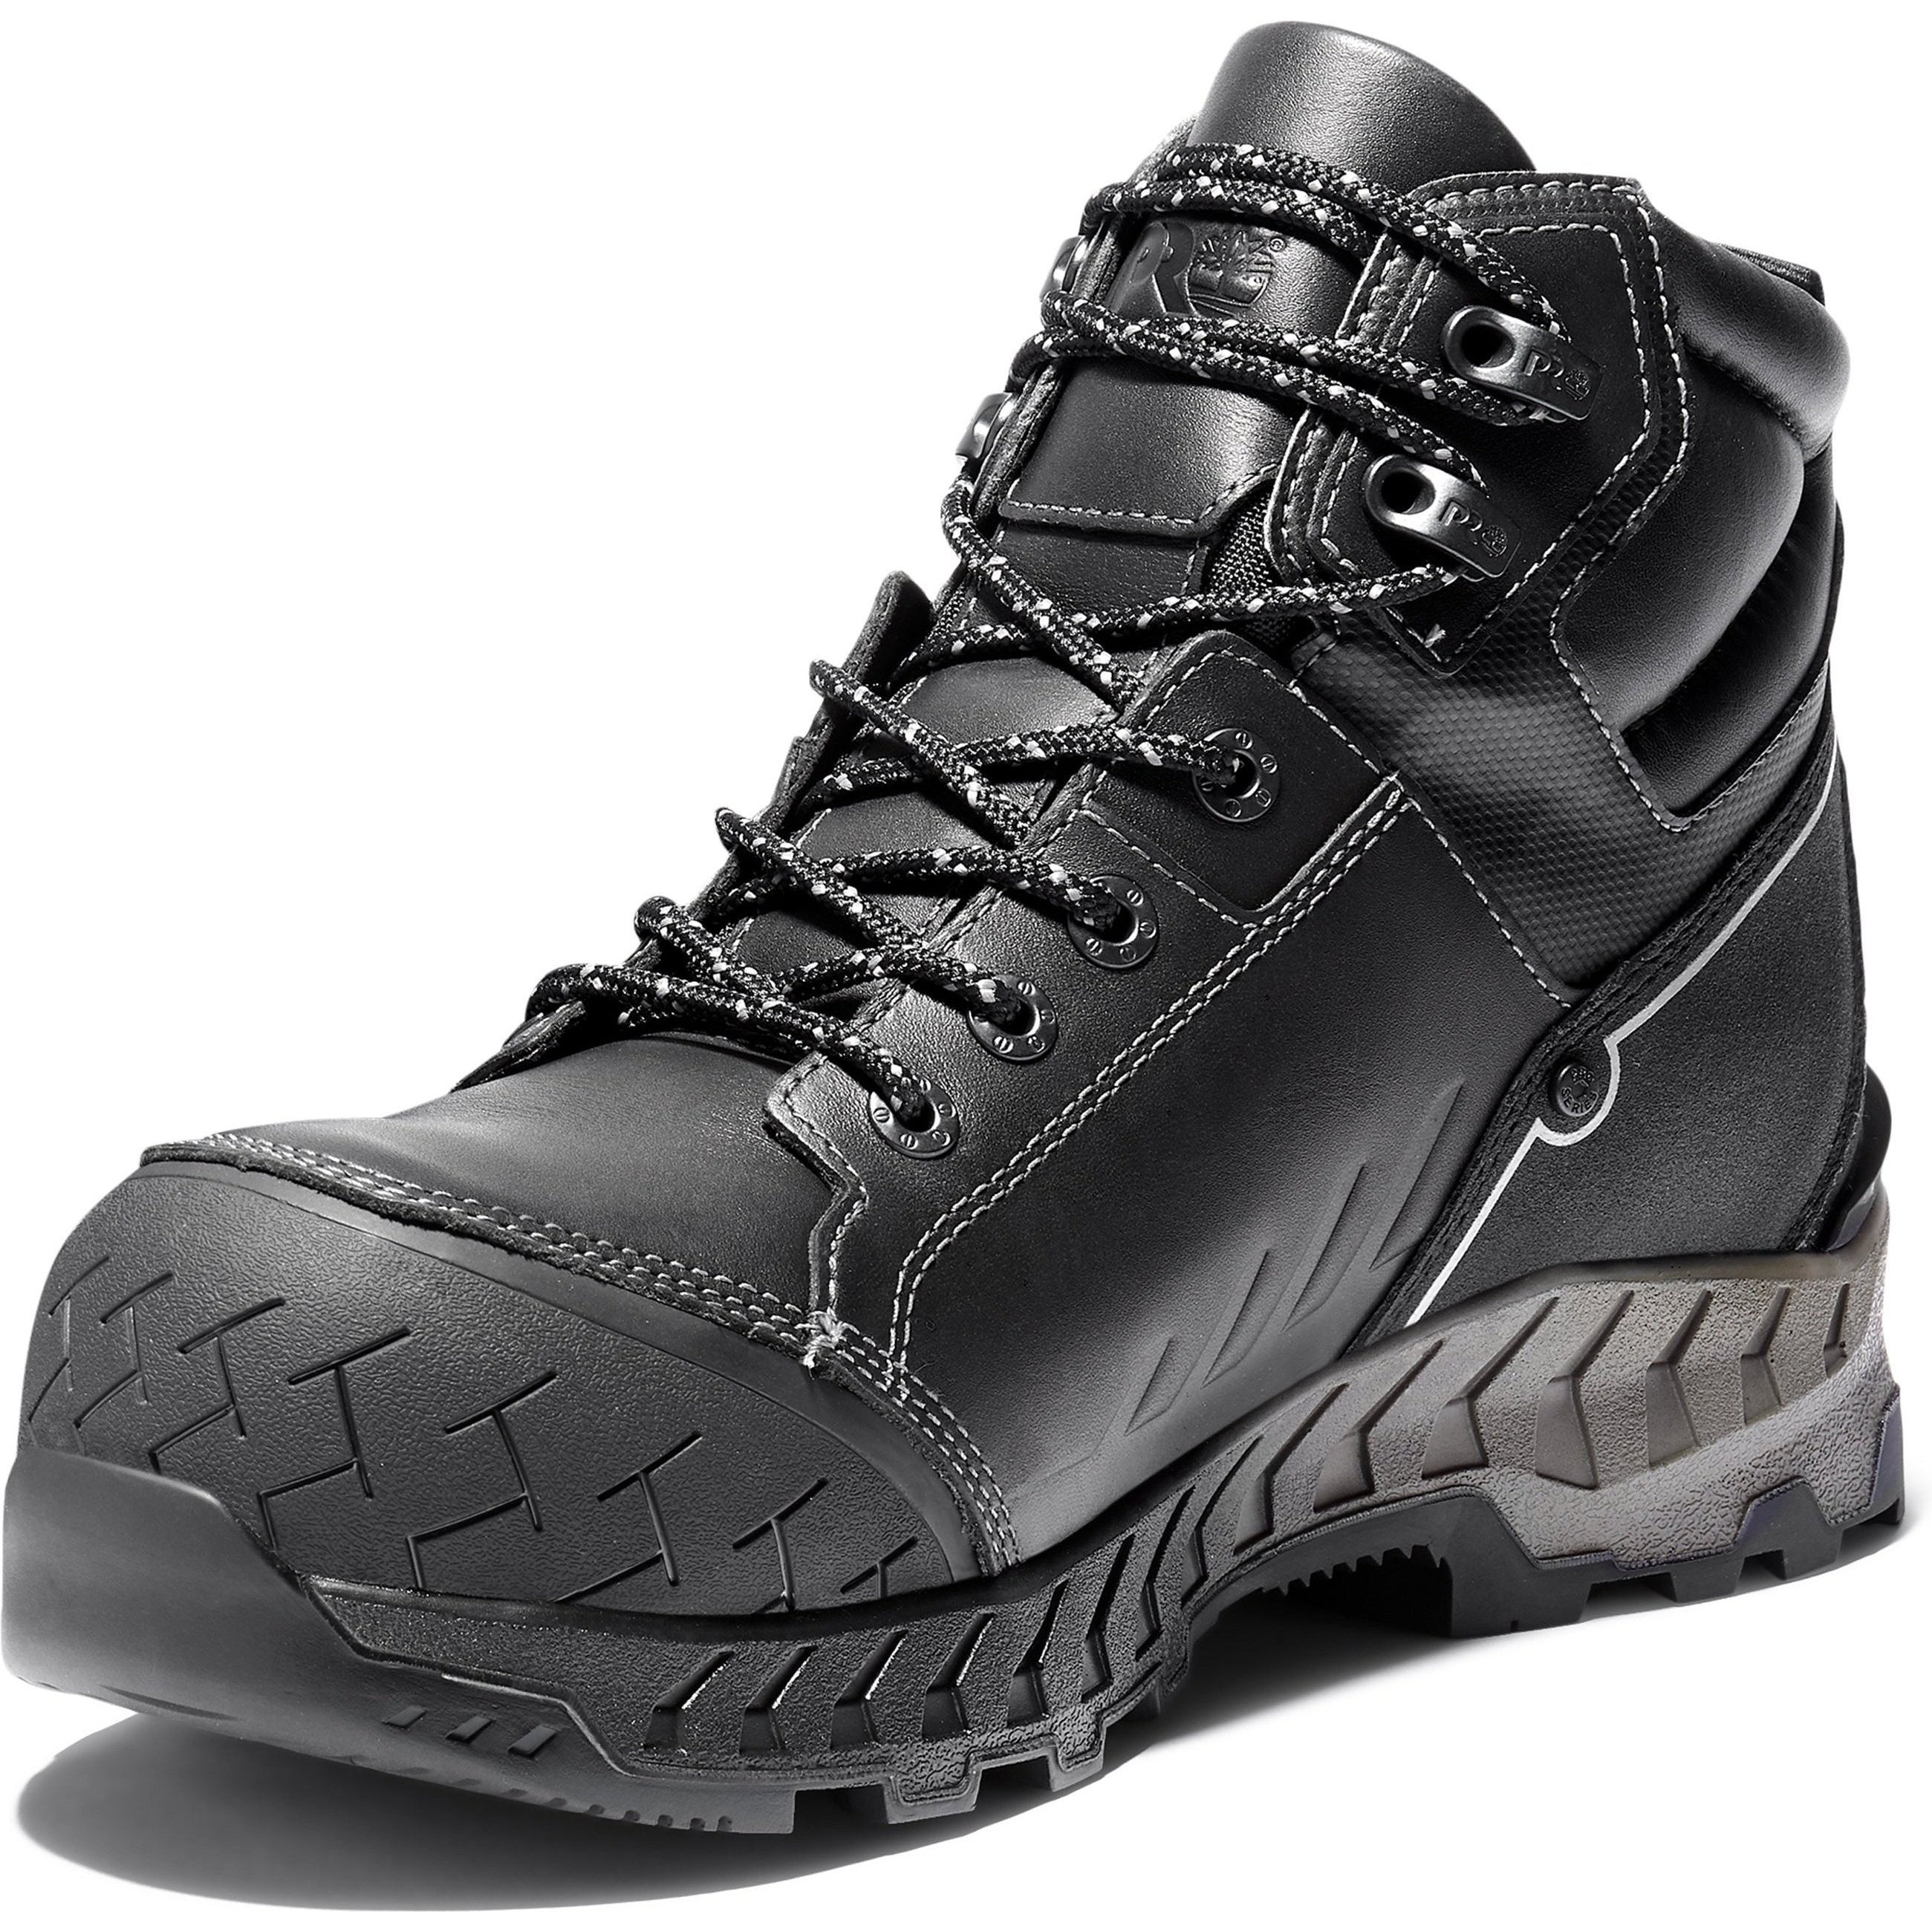 Timberland Pro Men's Work Summit 6" Comp Toe WP Work Boot- TB0A2262001  - Overlook Boots